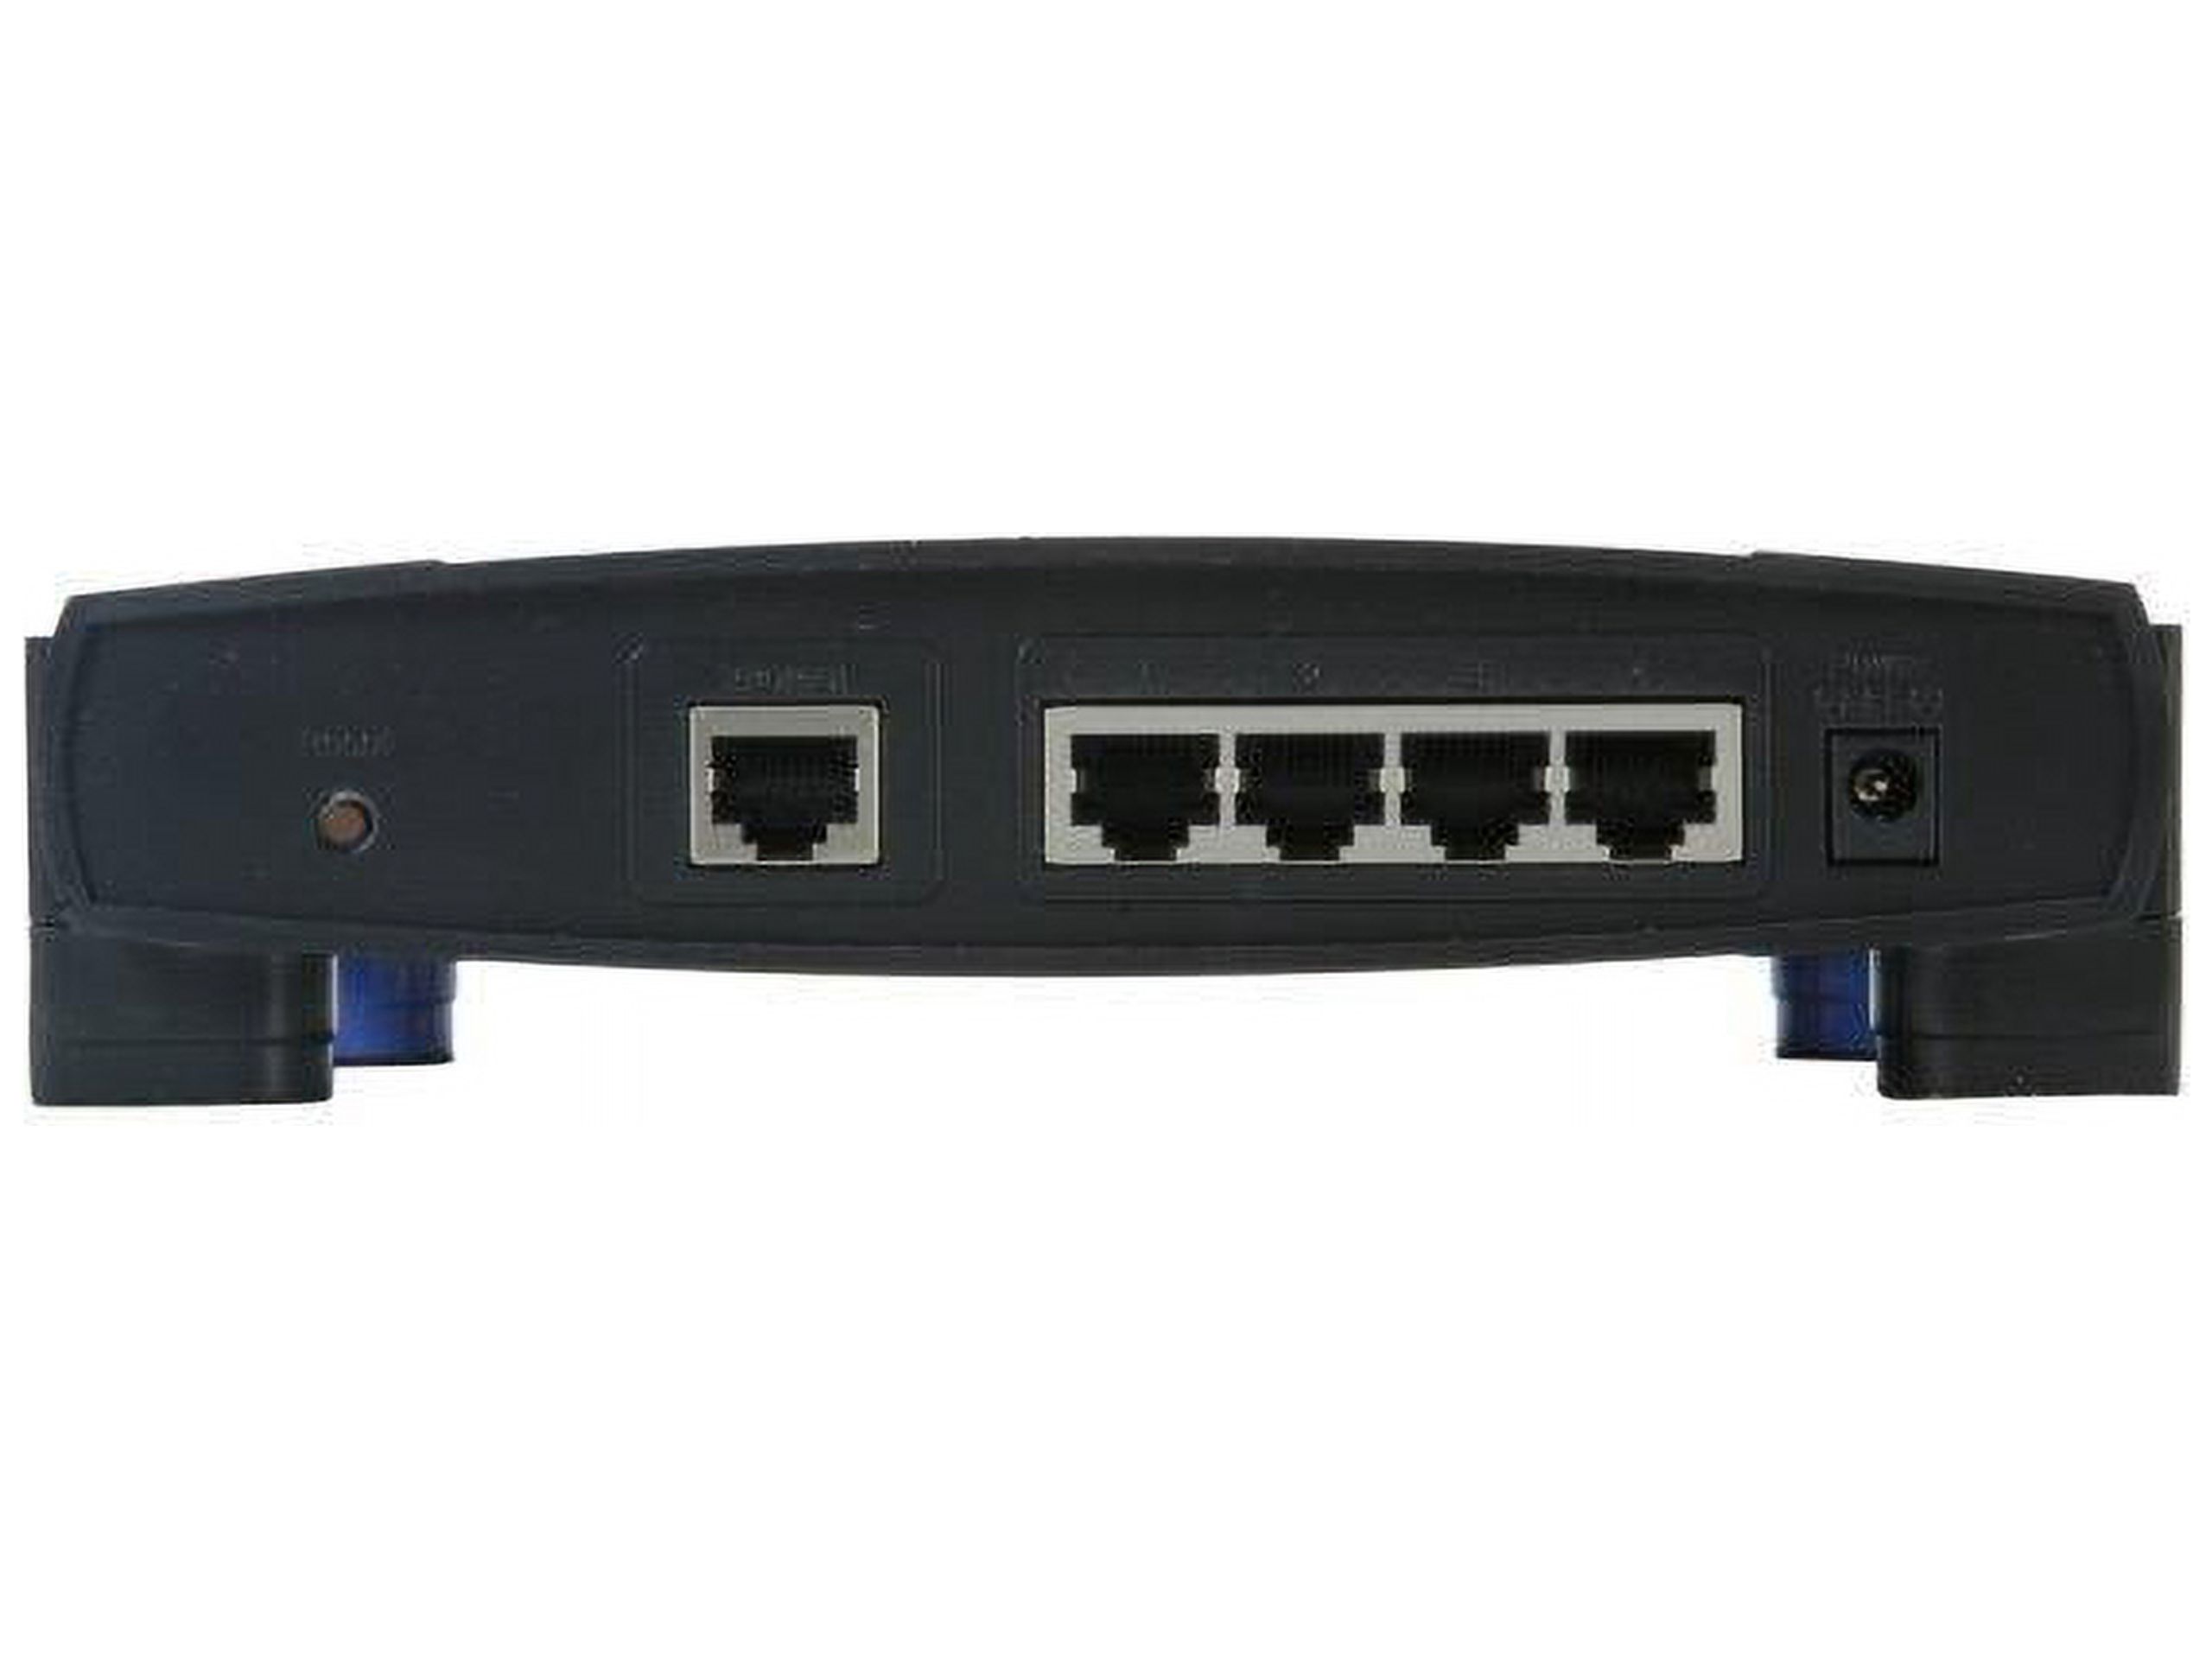 Linksys EtherFast BEFSR41 - Router - 4-port switch - WAN ports: 2 - image 2 of 2